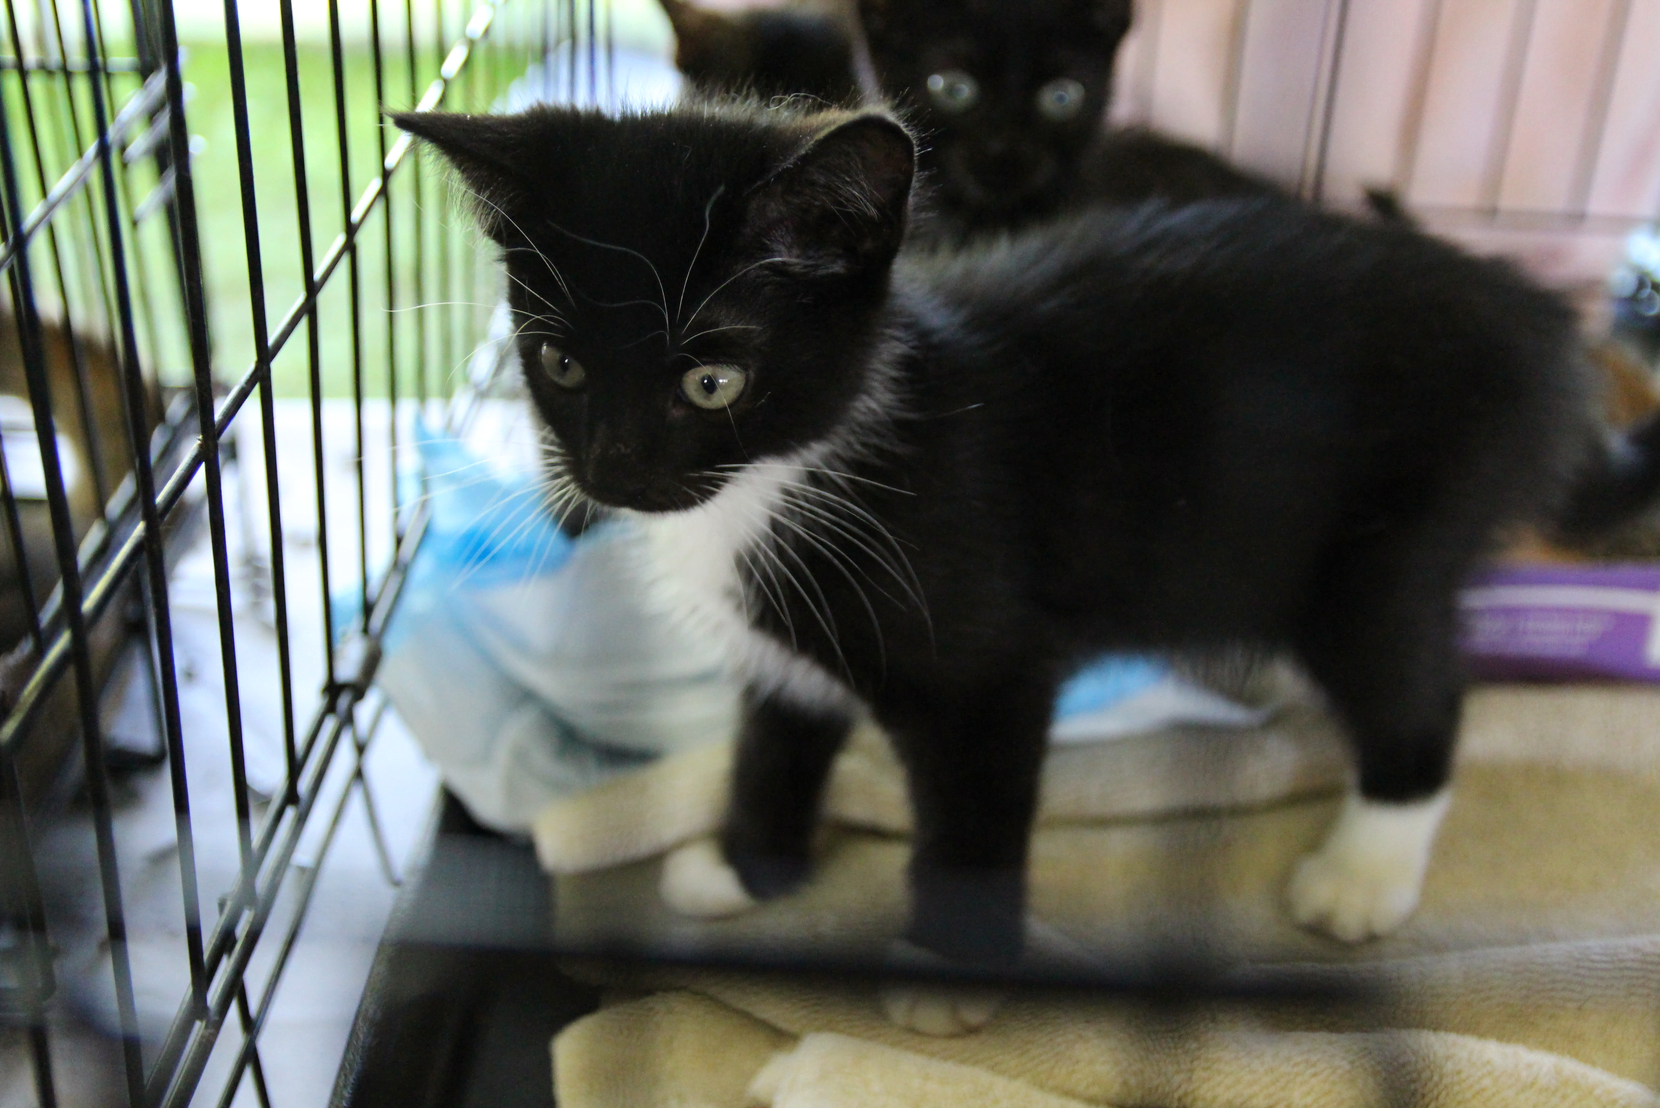 Abundant cats and kittens were also available for adoption at Puttin on the Dog. Sept 16, 2018 Photo: Leslie Yager